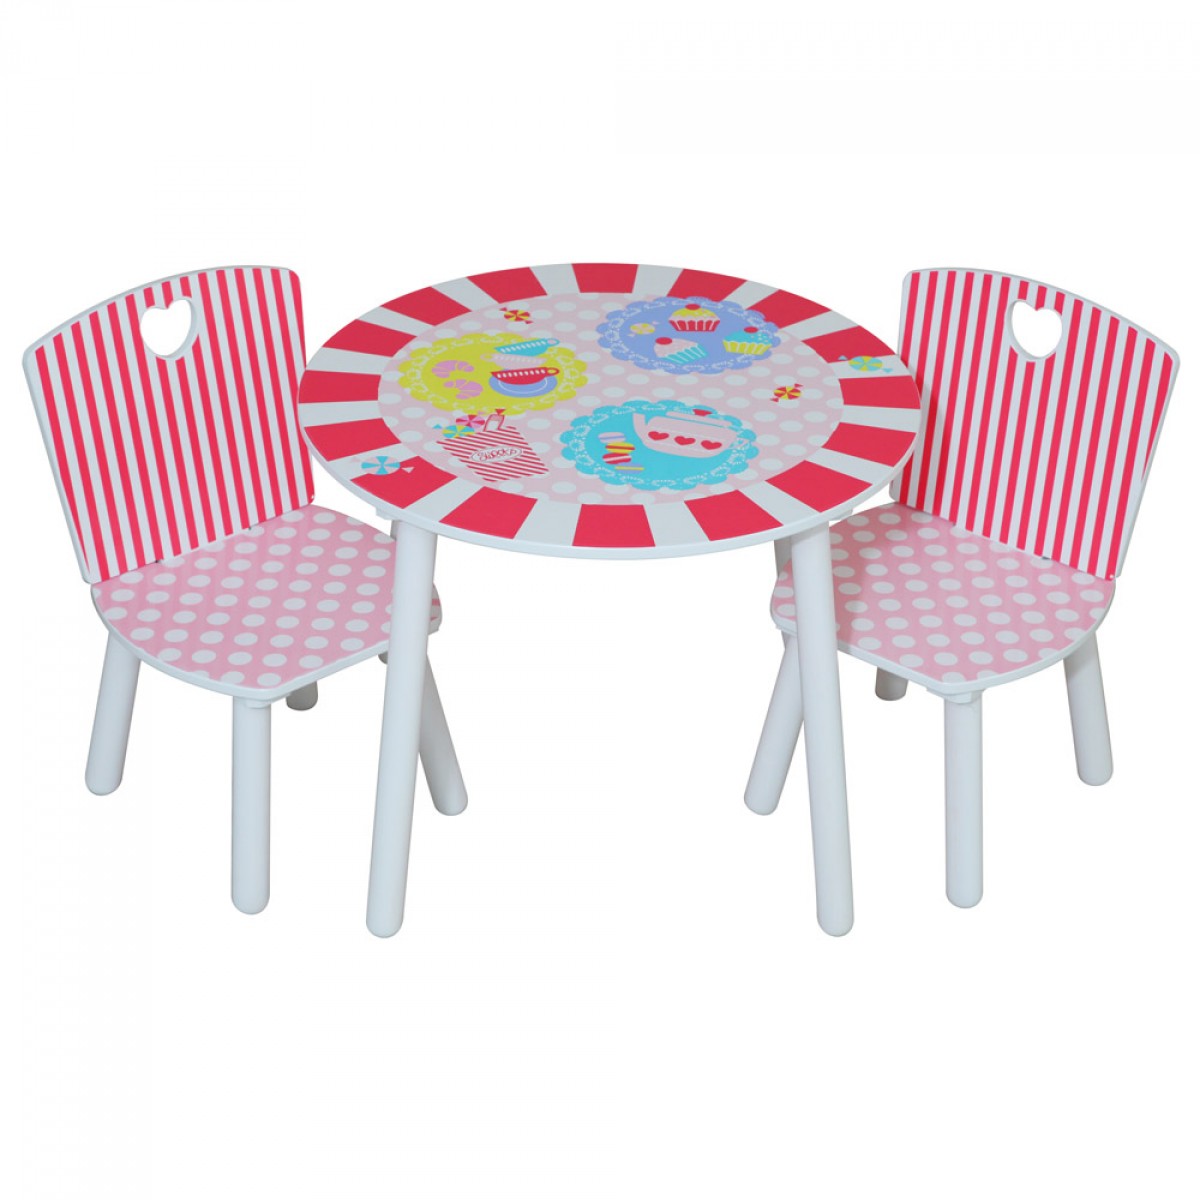 Kidsaw Patisserie Table And Chairs